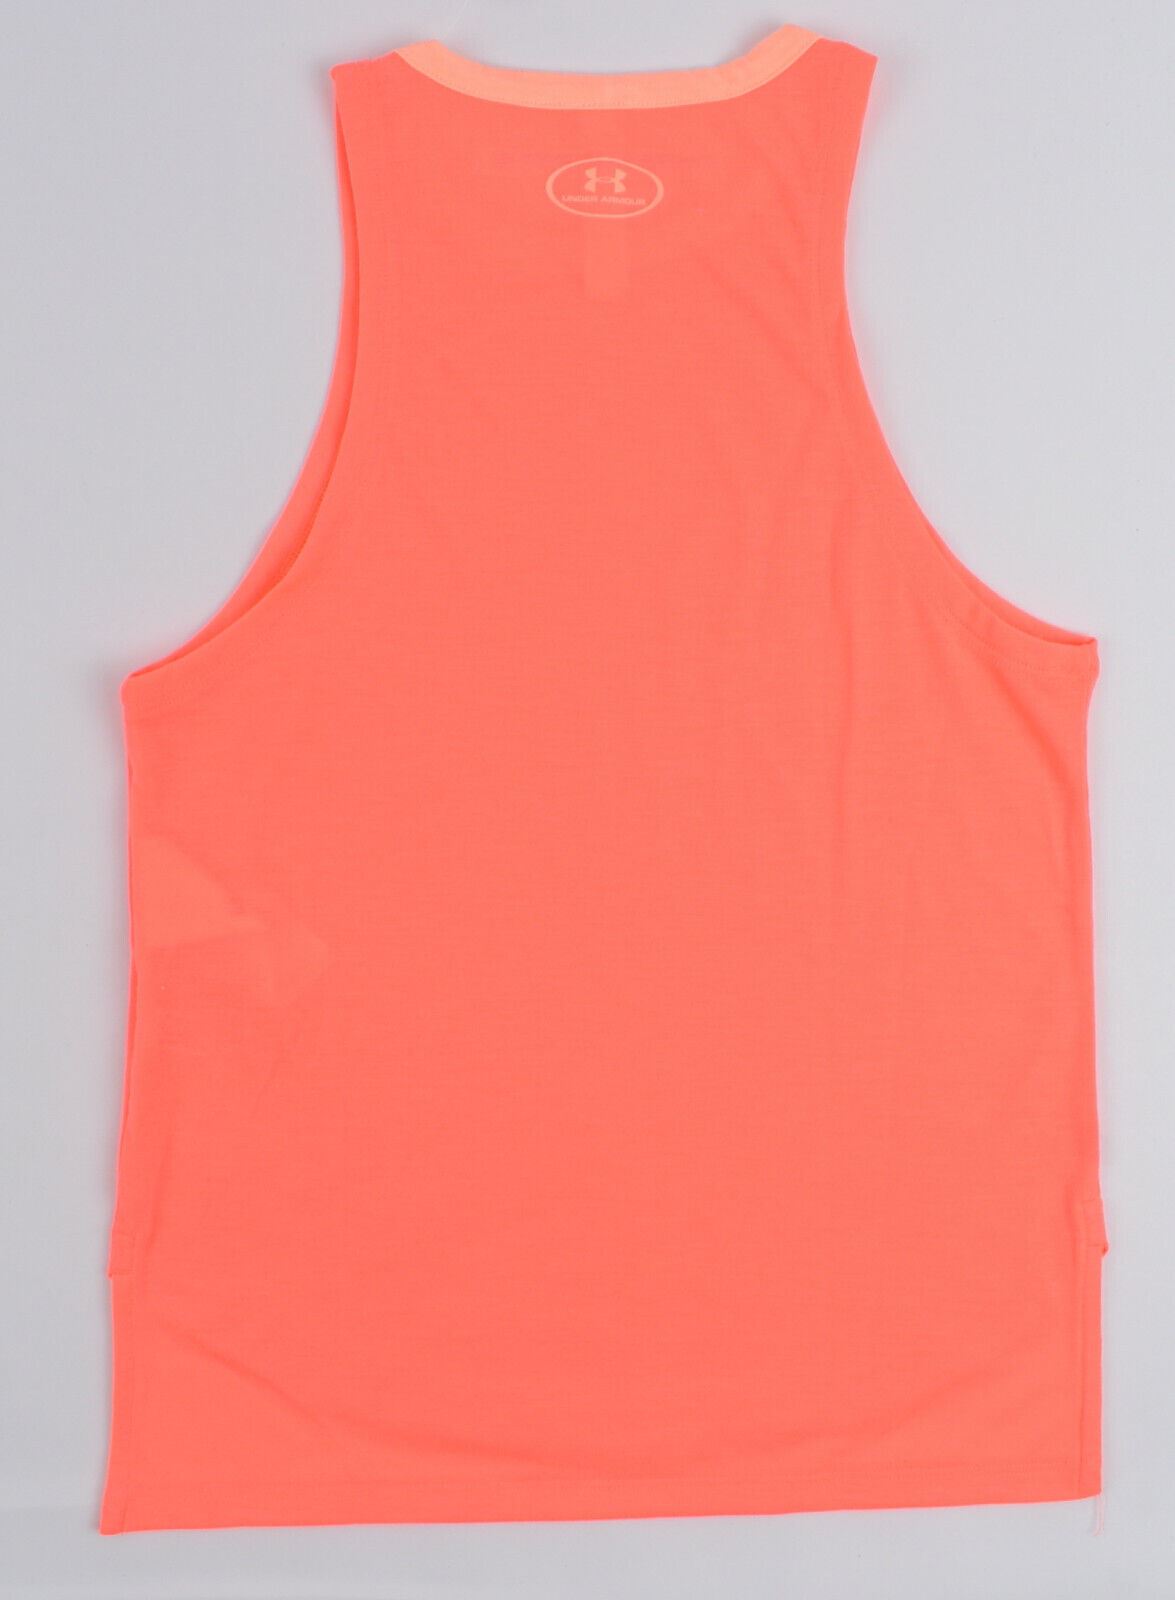 UNDER ARMOUR Girls' Threadborne Play Up Tank Top, Coral, size 7-8 years